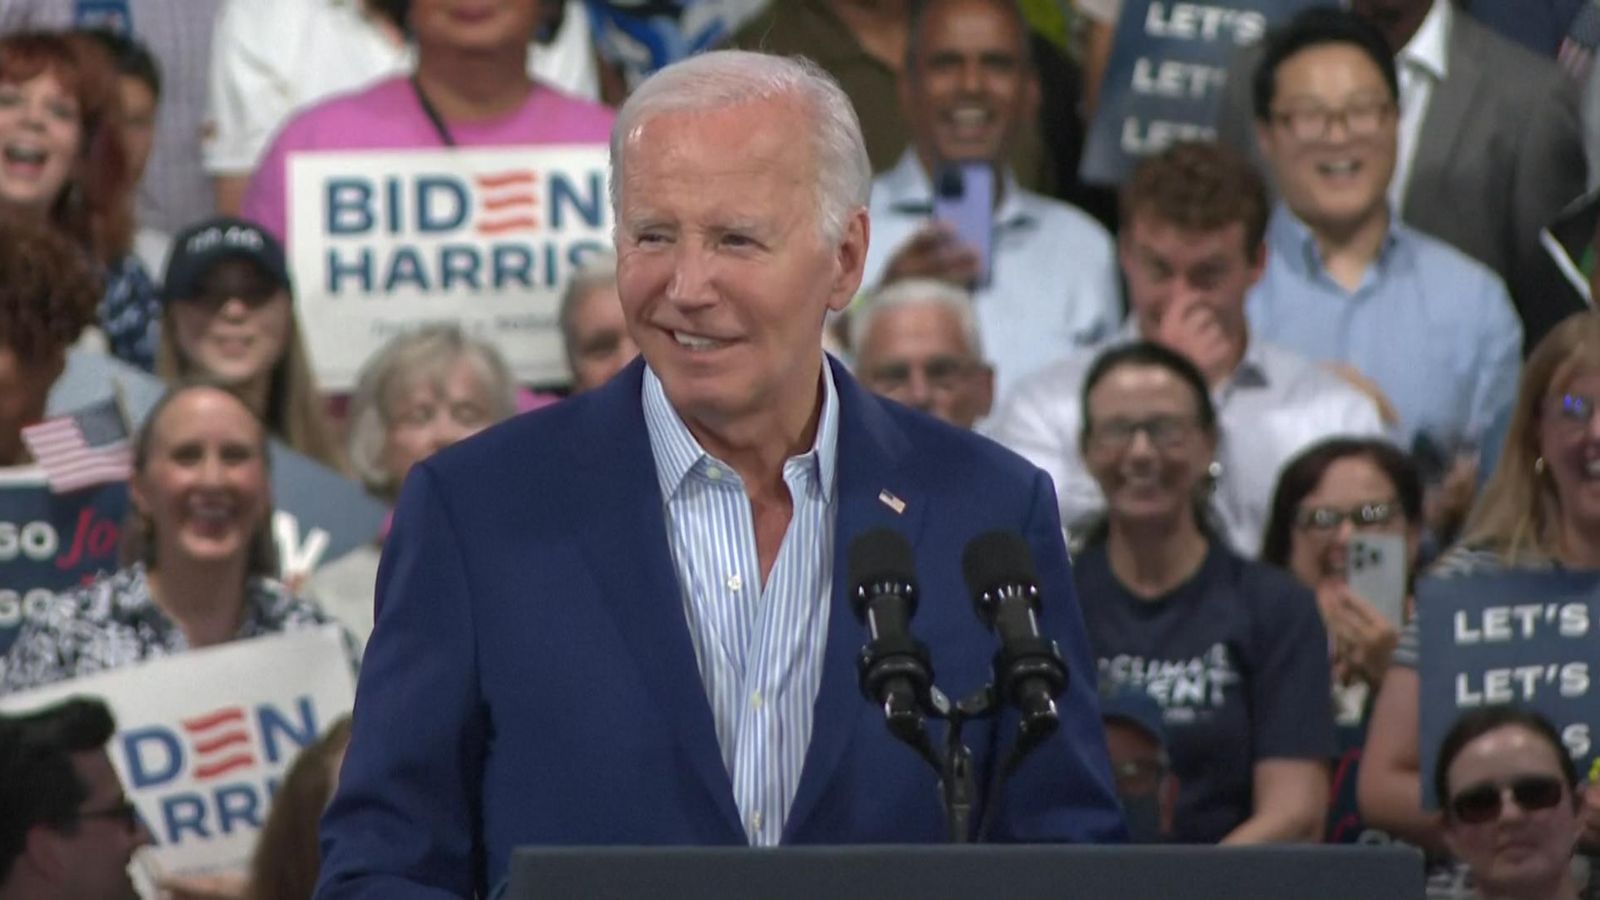 Defiant Biden attacks Trump but admits 'I don't debate as well as I used to'